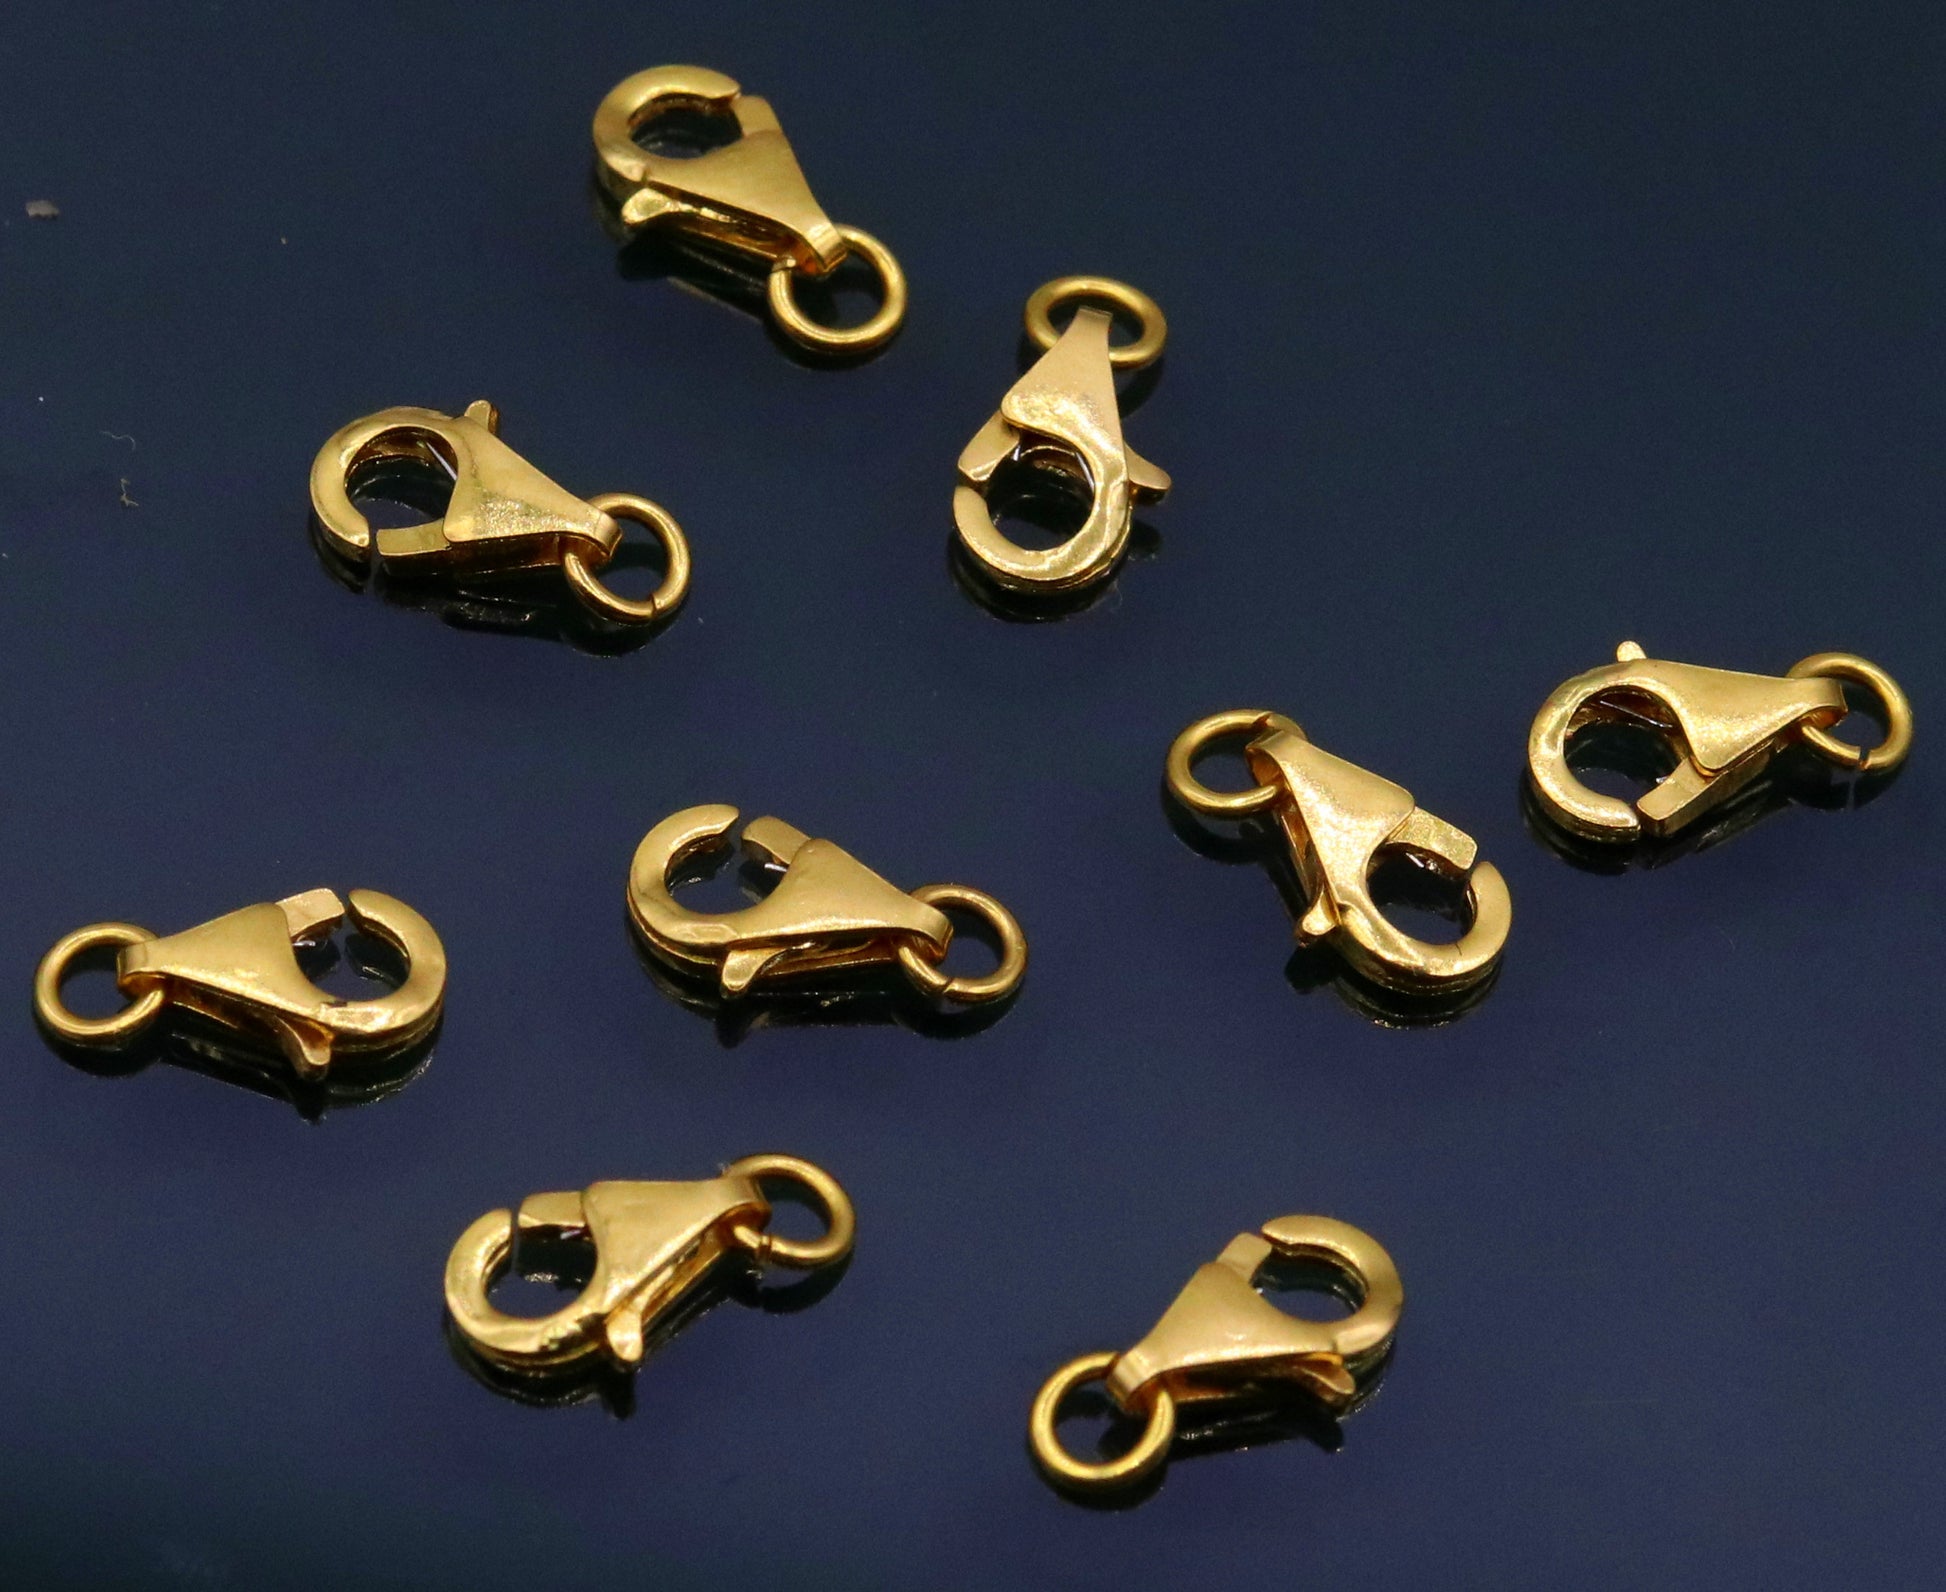 22kt yellow gold handmade excellent dolphin fish lock clasps closure for chain or bracelet for making jewelry - TRIBAL ORNAMENTS